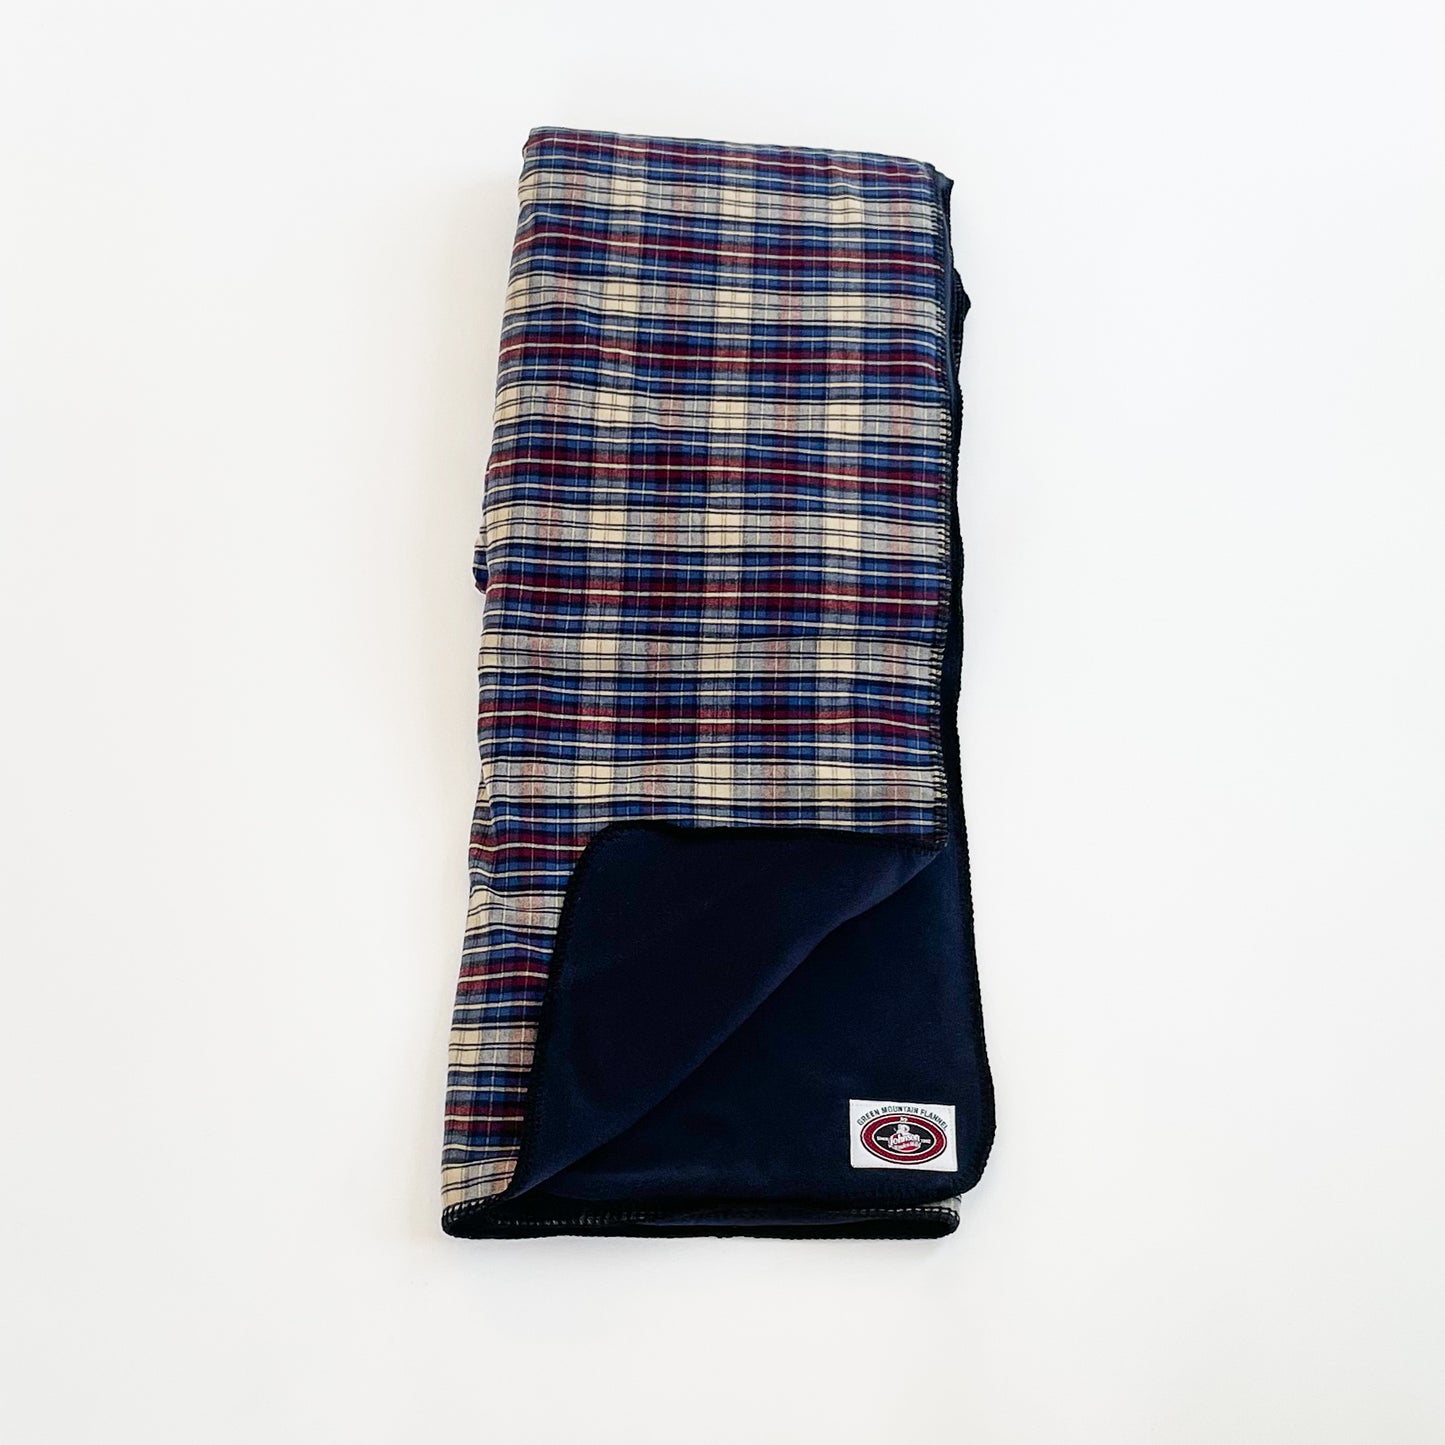 Green Mountain Flannel Throw Blue/Maroon & Tan Plaid stripes with fleece lining open corner view